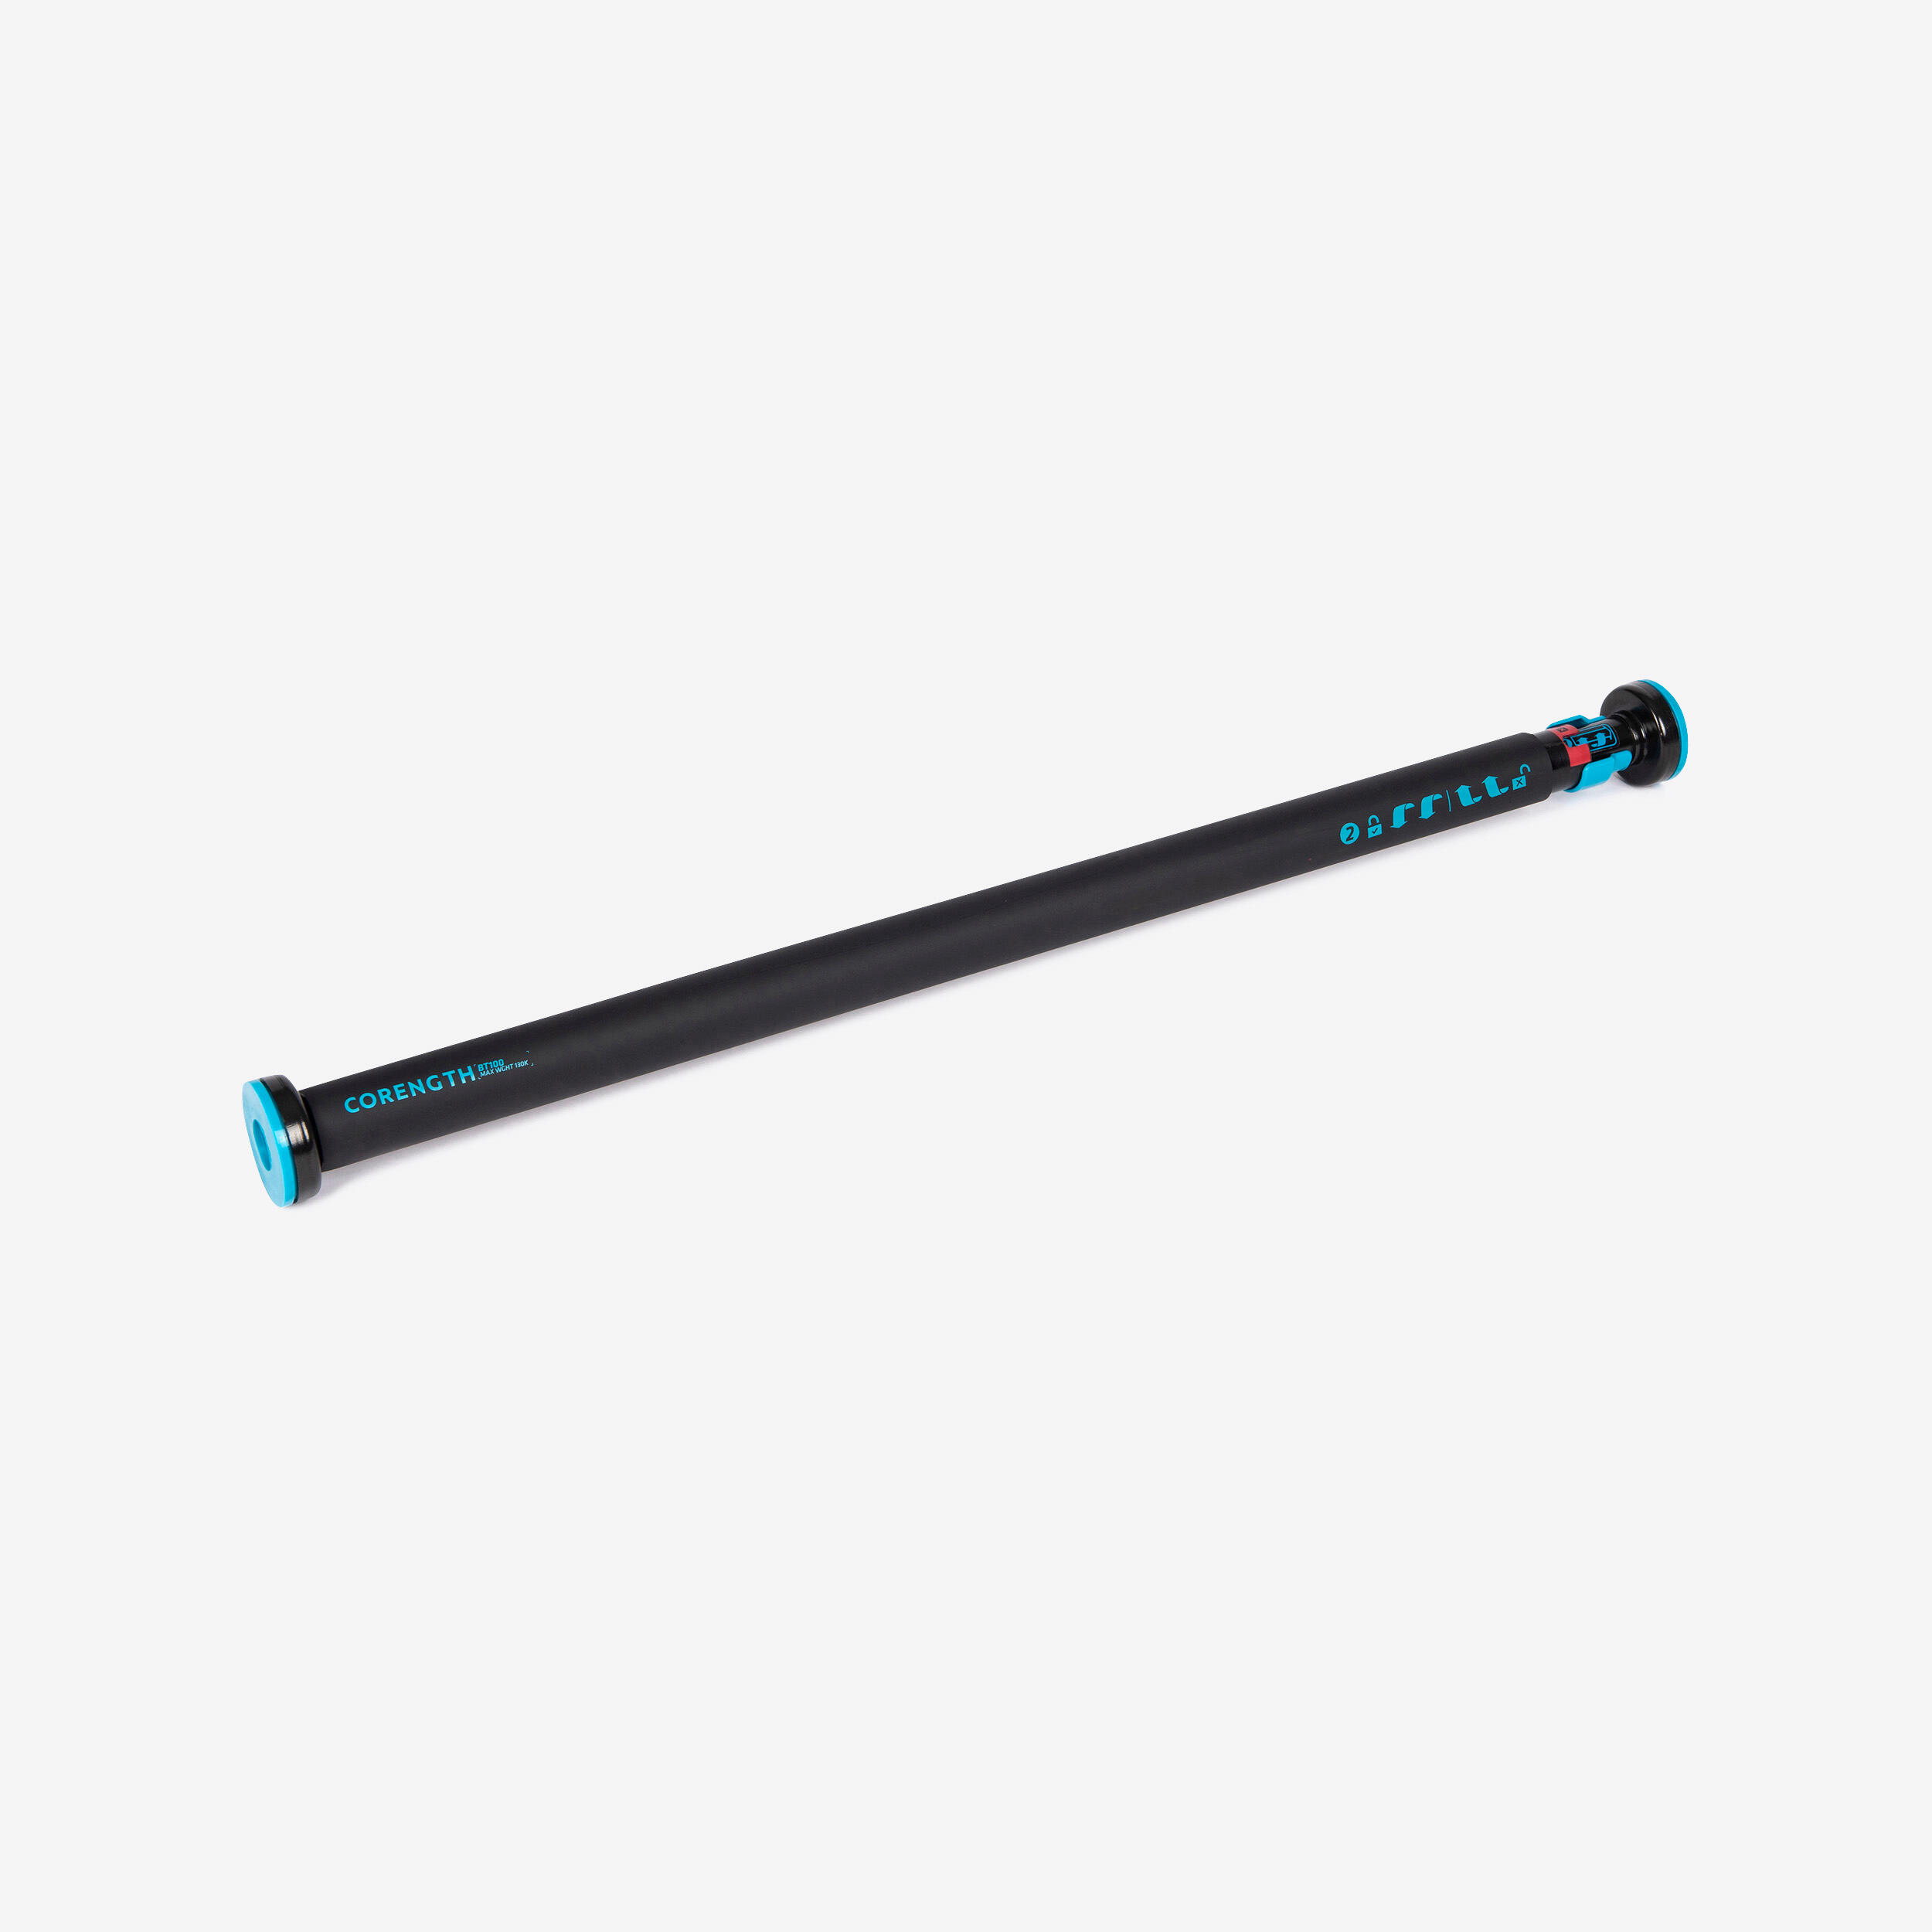 Image of 100 cm Lockable Pull-Up Bar